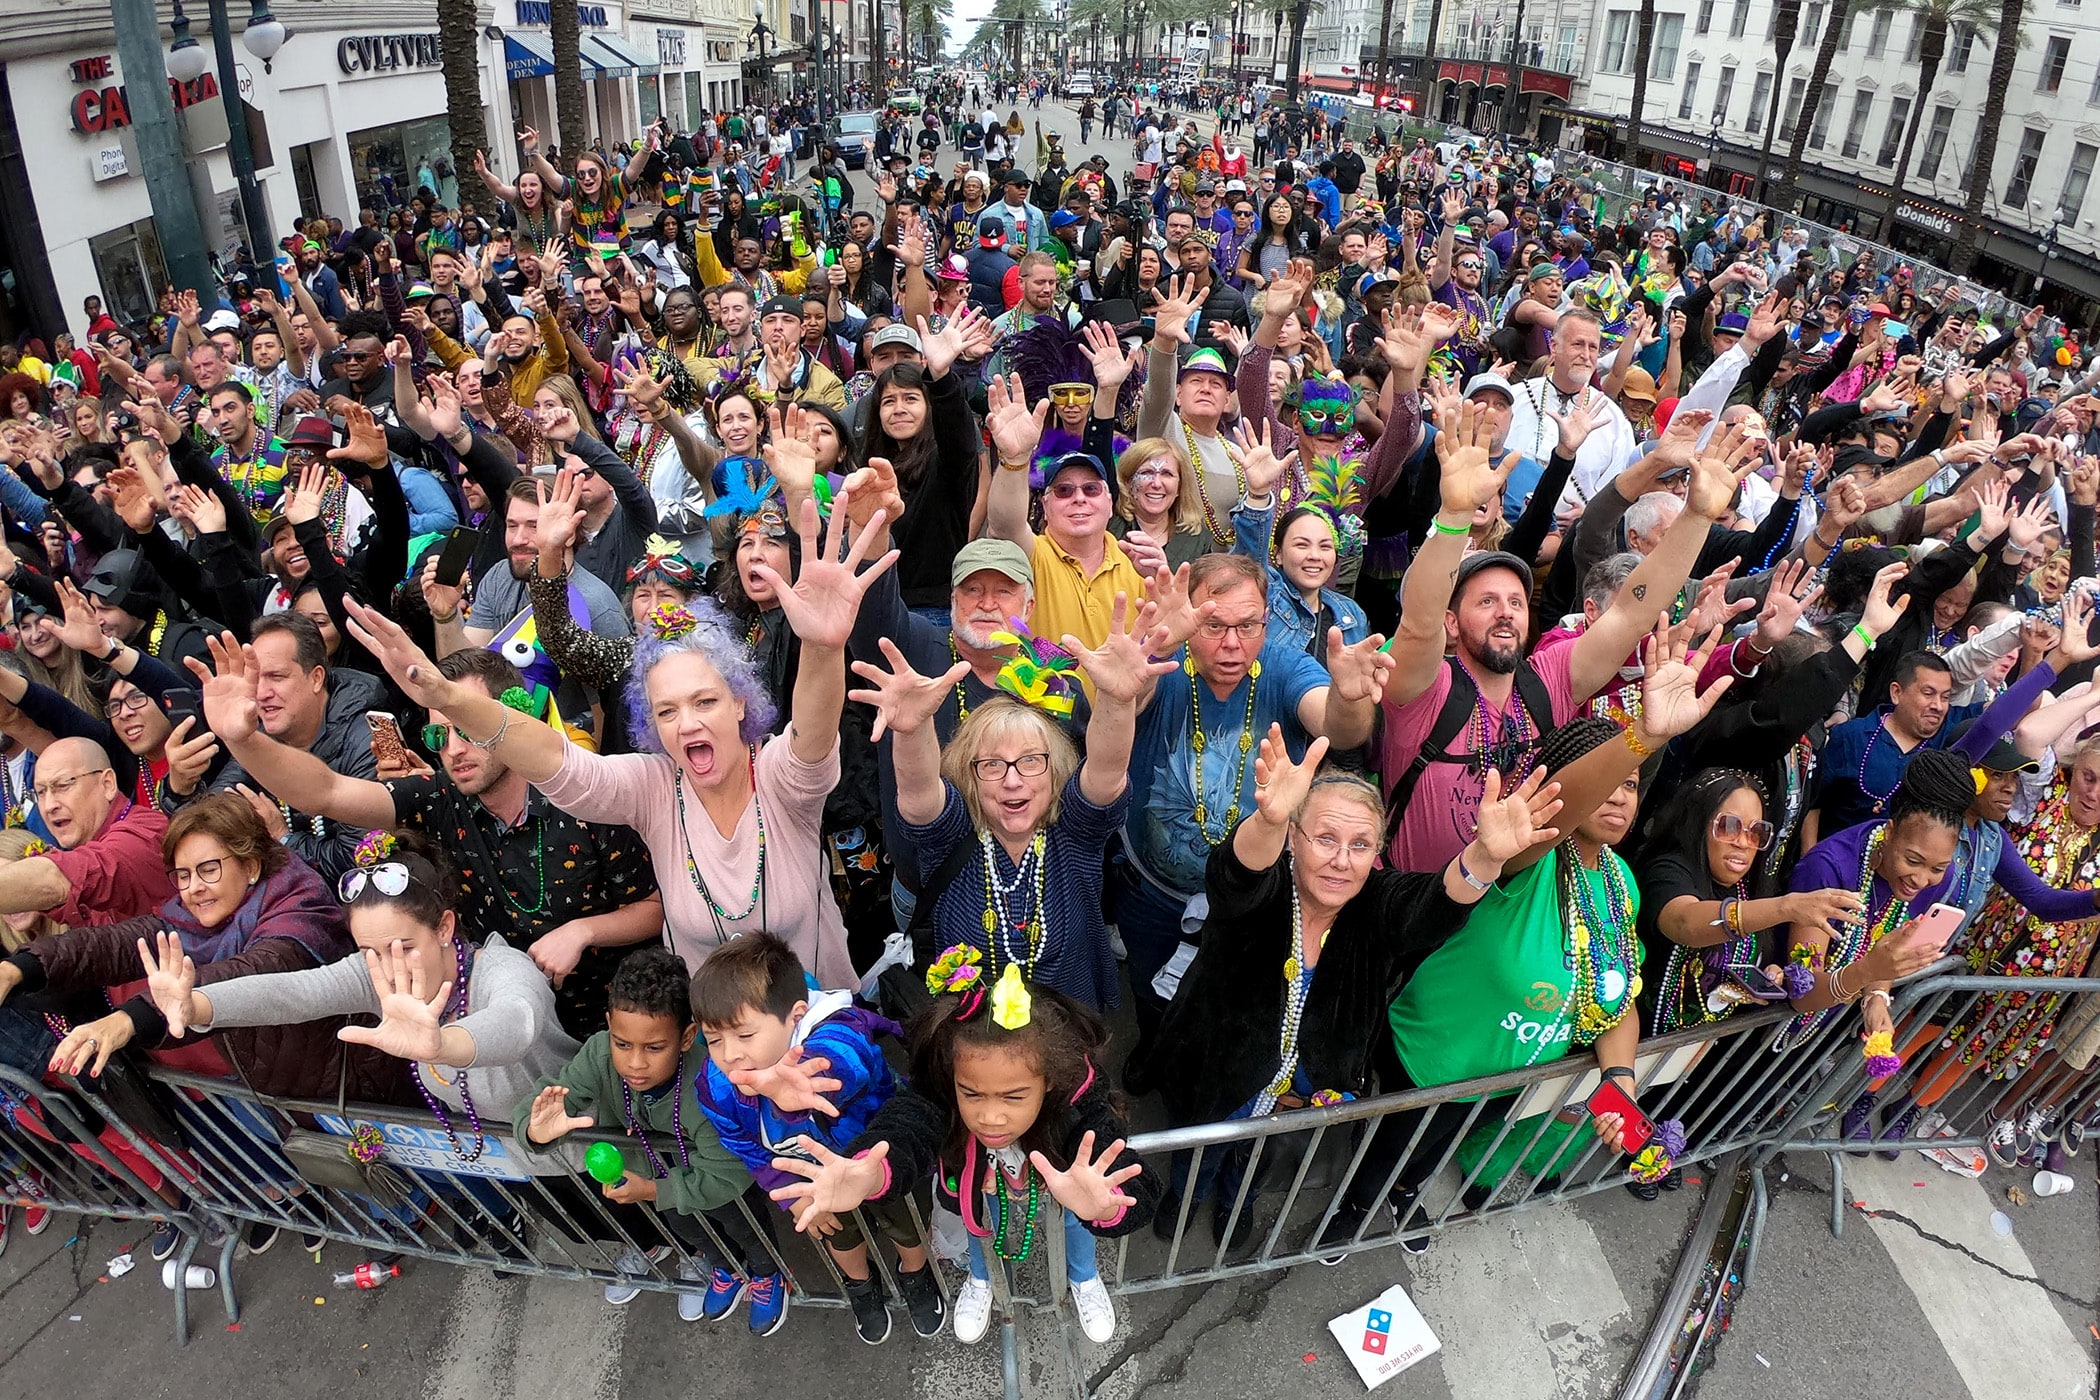 The crowd catches throws on Canal Street as the 440 riders of Rex, King of Carnival, roll down the Uptown route on 26 floats with their 139th parade entitled “Omens and Auguries” on Mardi Gras Day, 2020. (Photo by Michael DeMocker)